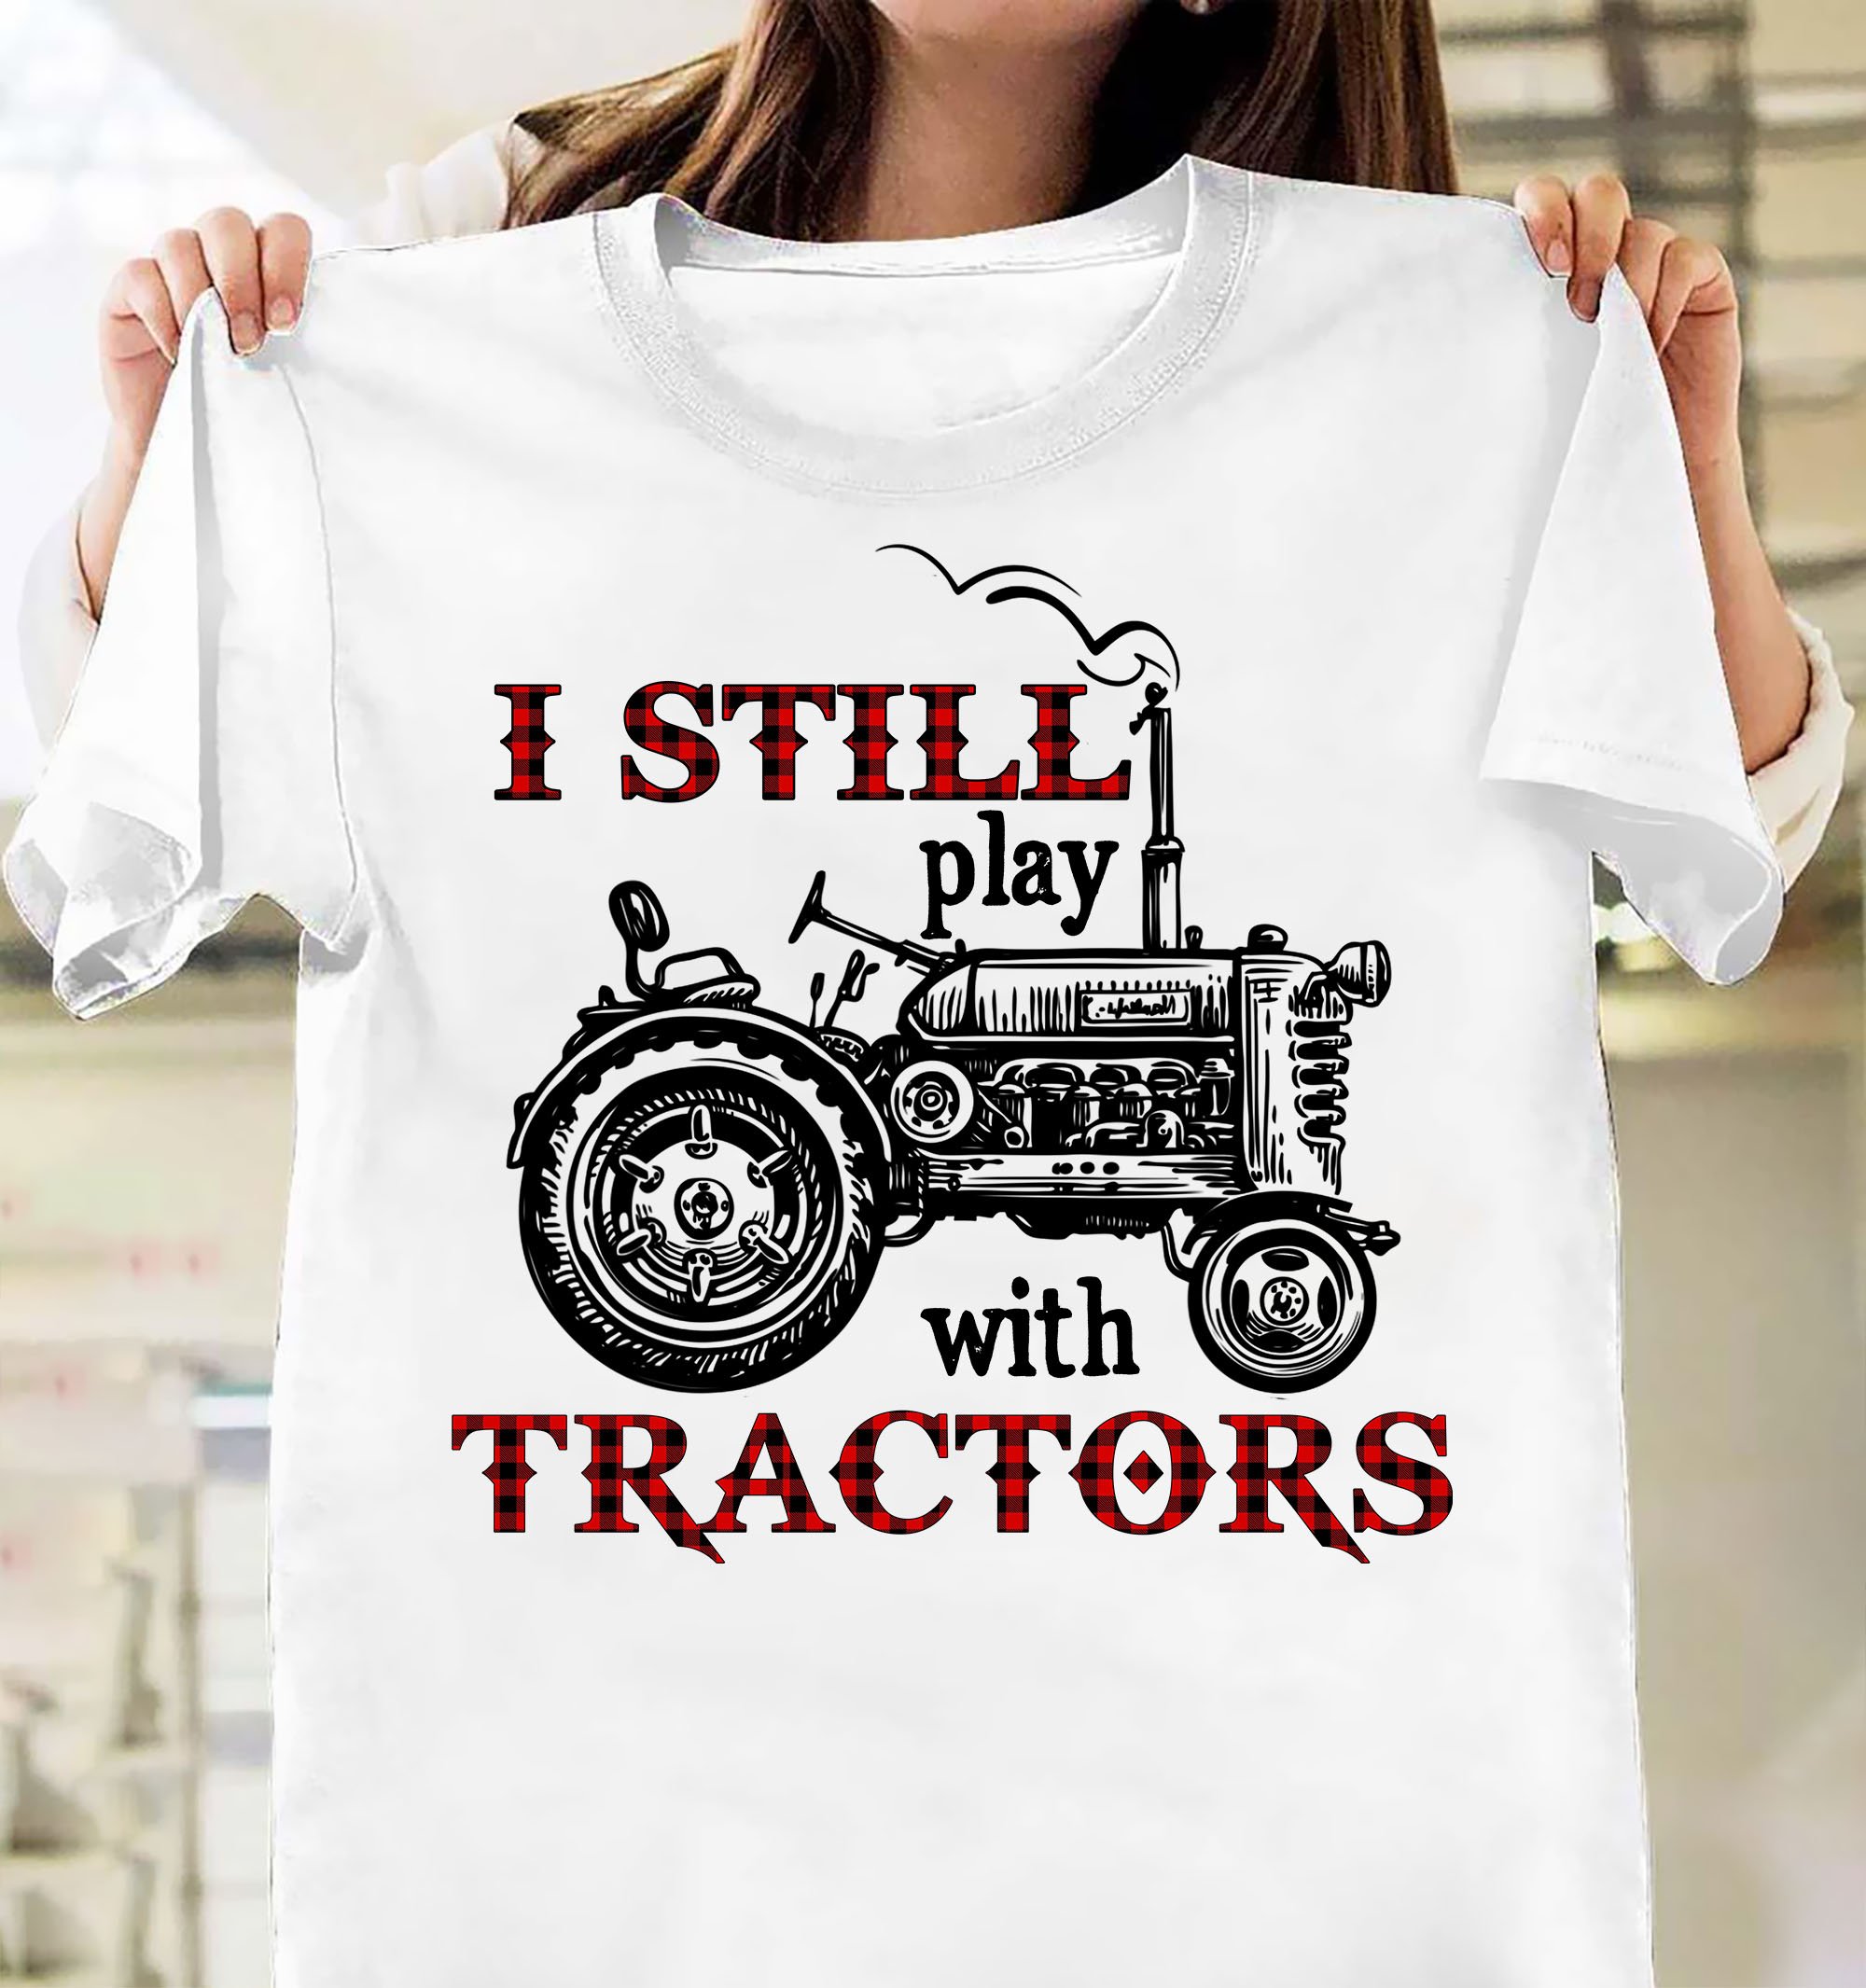 Tractor Artwork – I Still Play With Tractors – Farm White T-Shirt